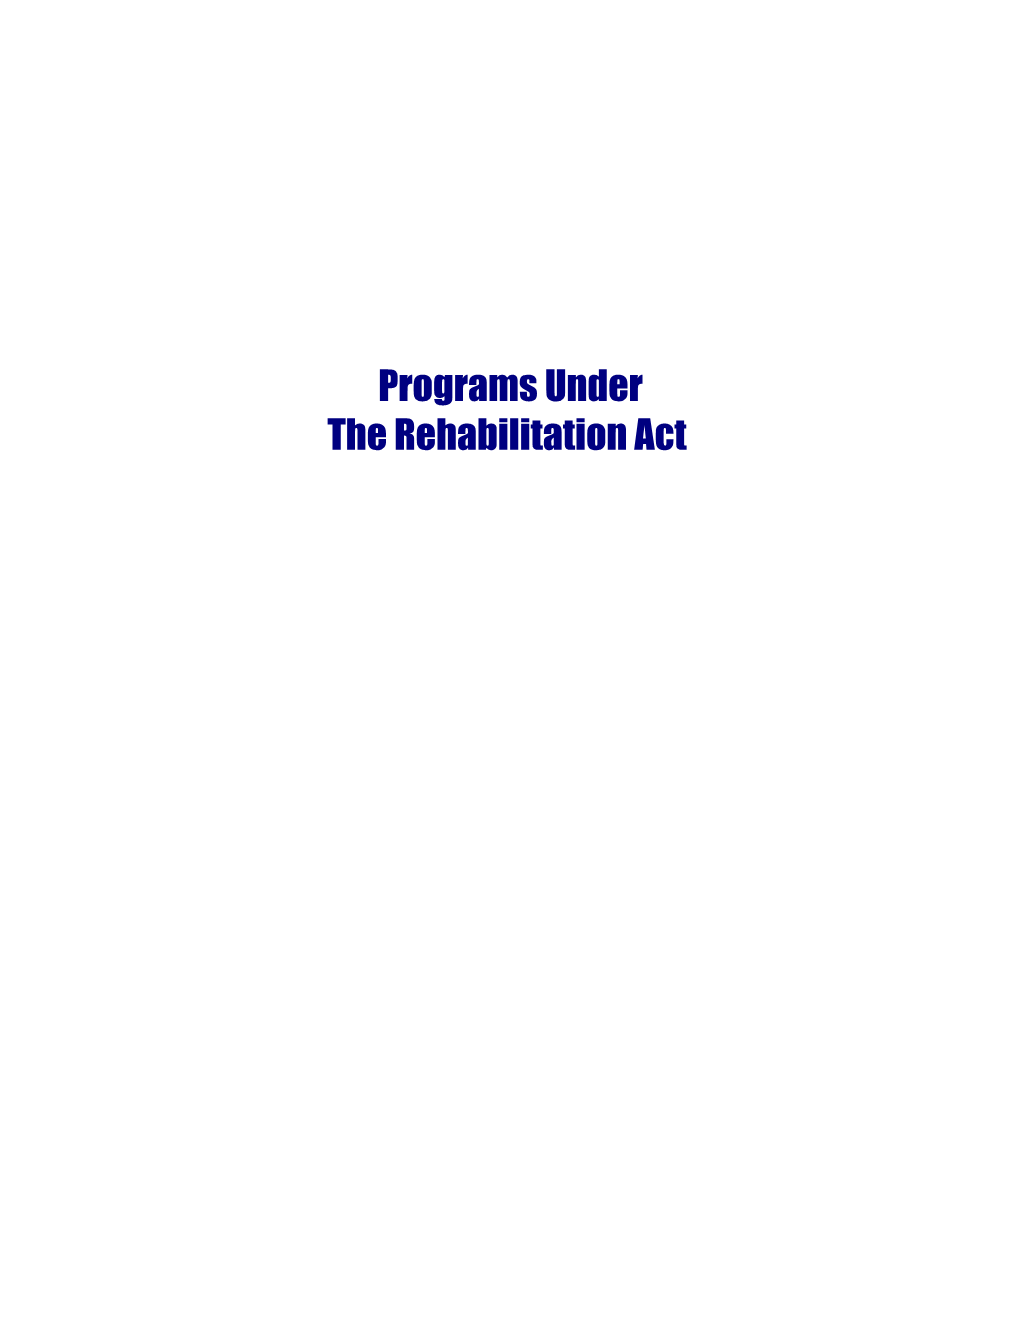 Rehabilitation Services Administration (RSA) Annual Report, 1998-1999: Programs Under The